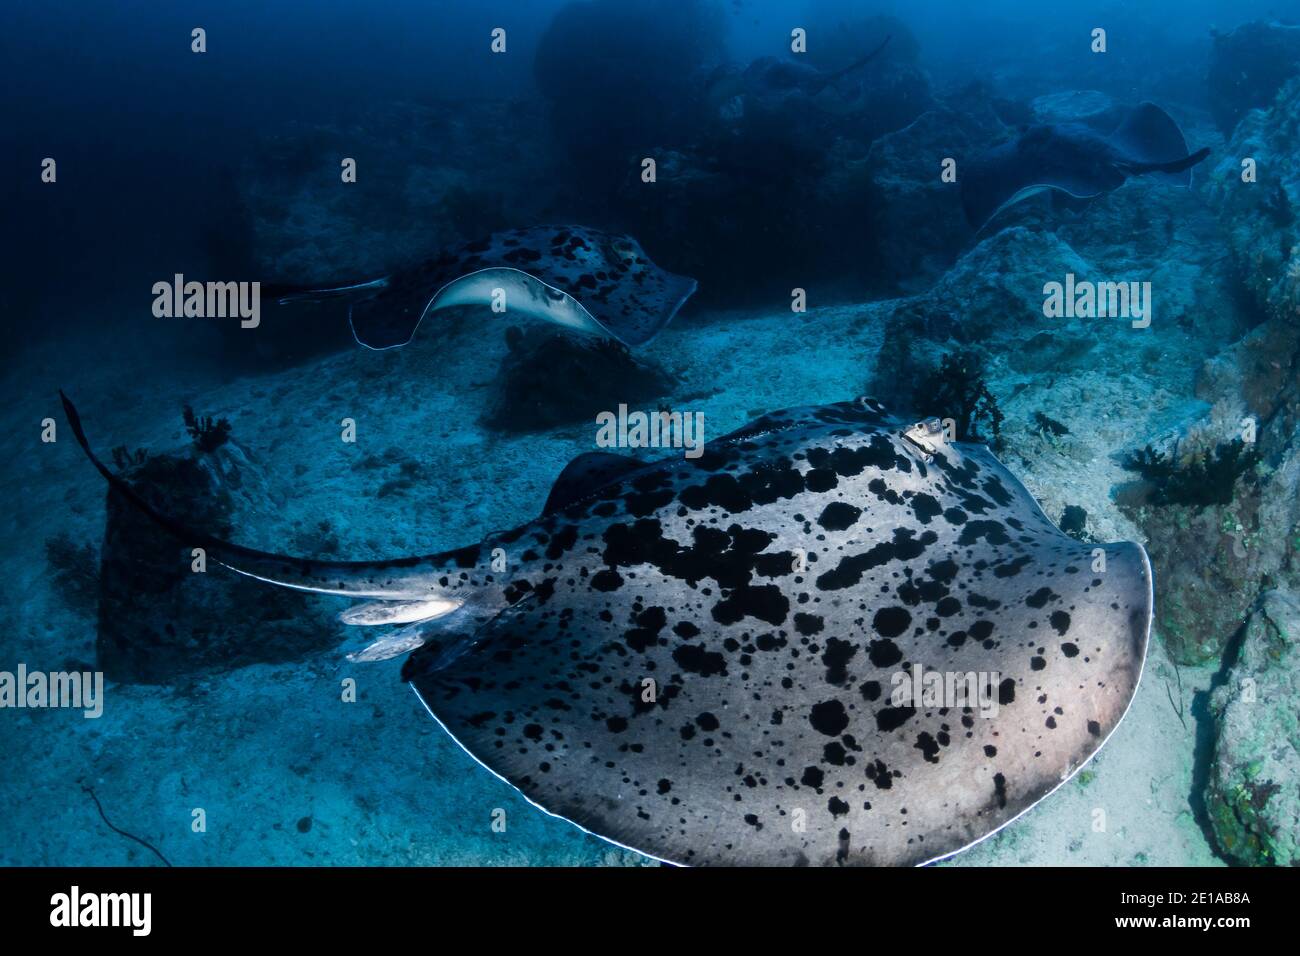 Huge Marble Rays deep underwater on a tropical coral reef in the Andaman sea Stock Photo